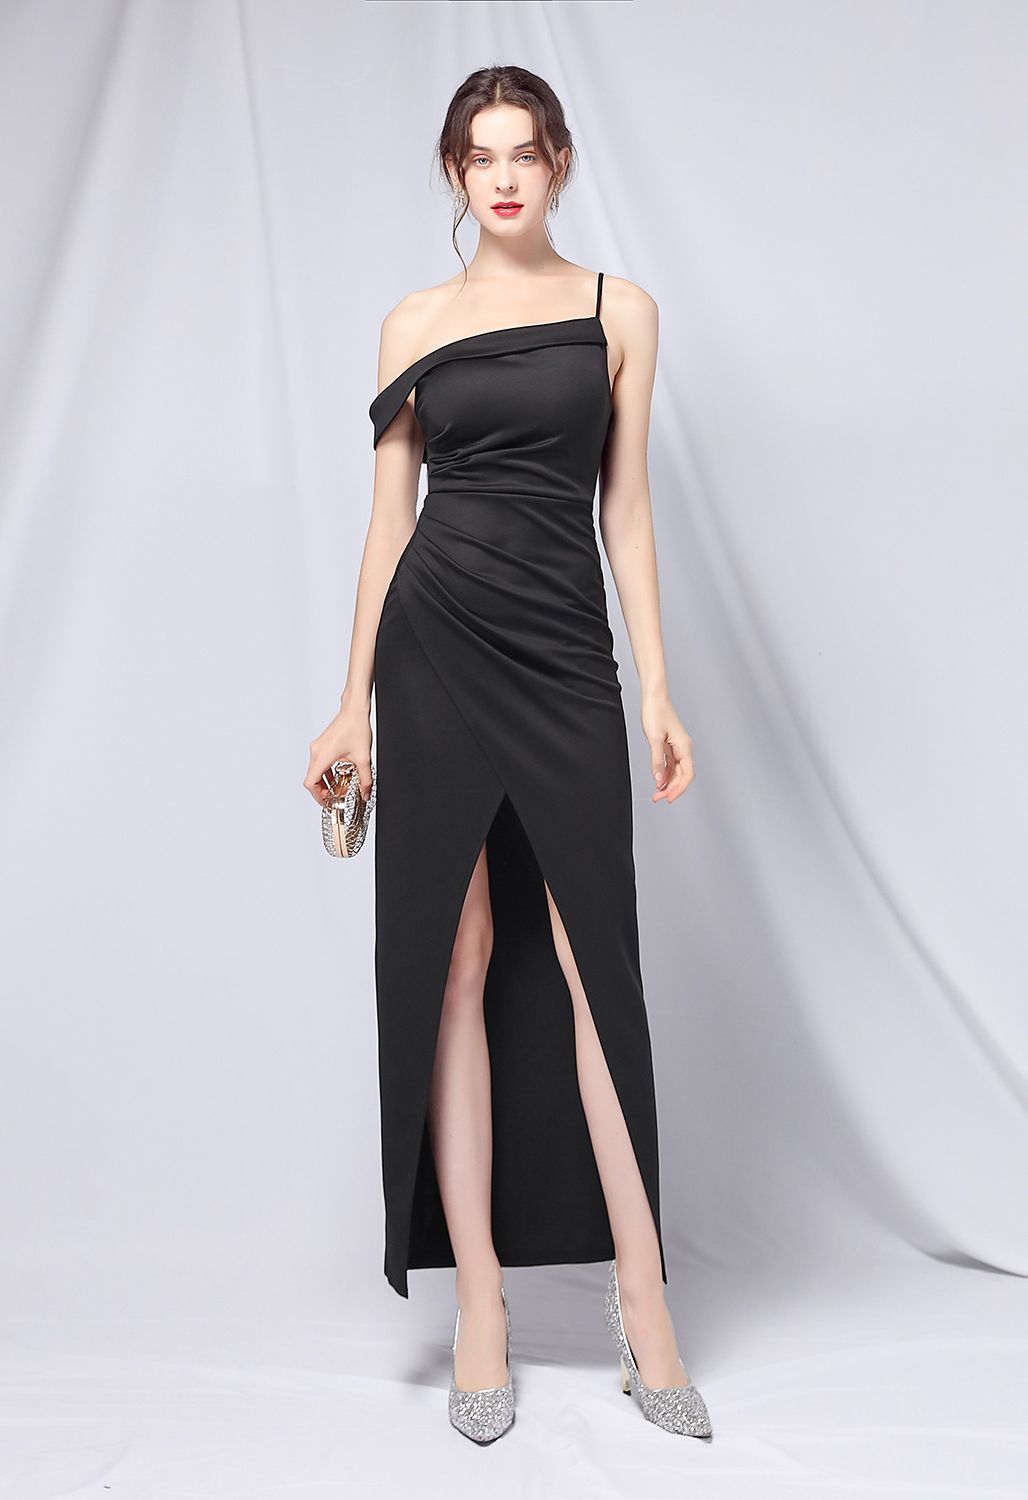 Single Strap Front Slit Gown in Black